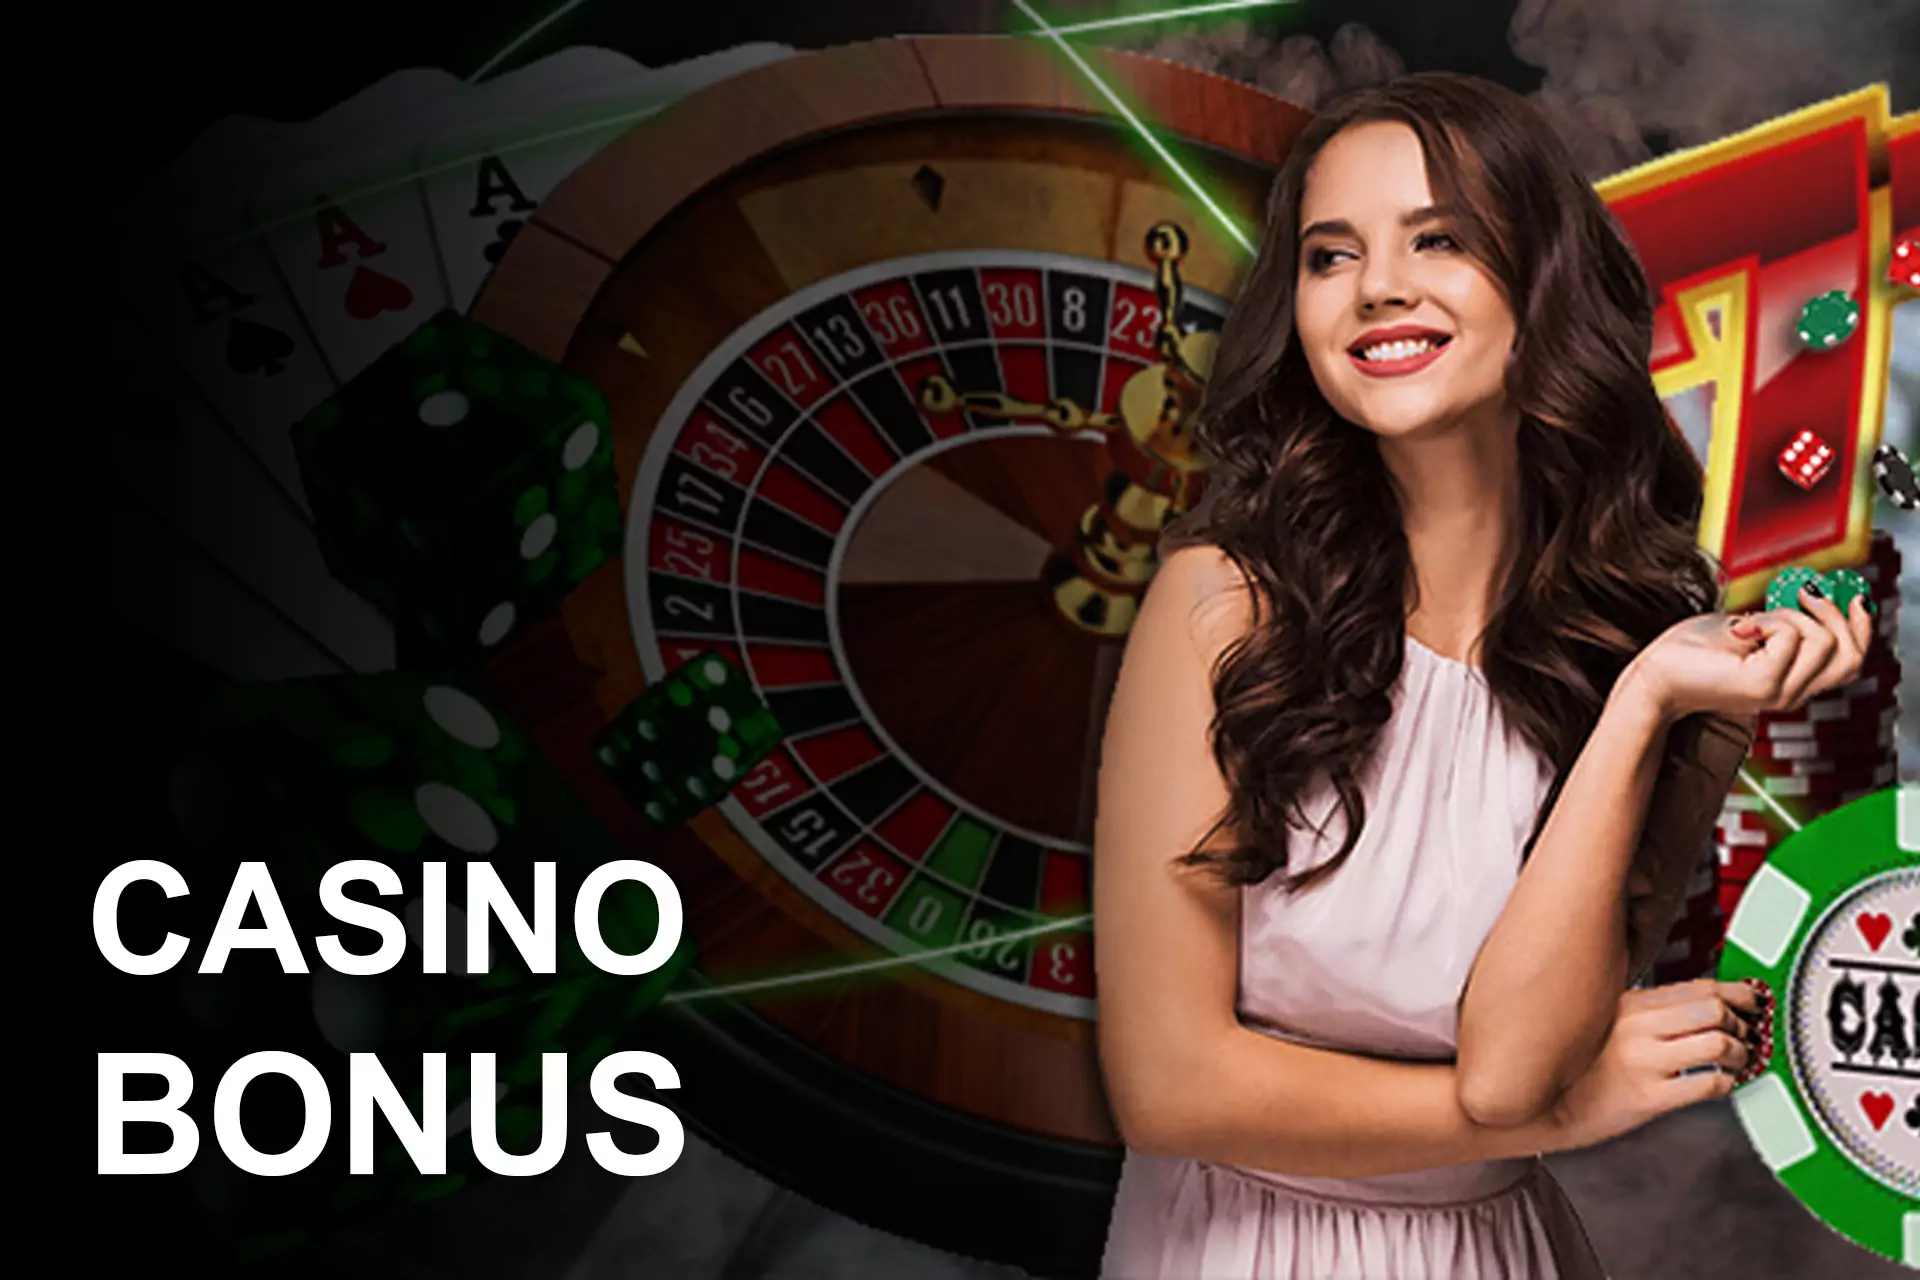 Casino fans would appreciate the welcome offer for players.